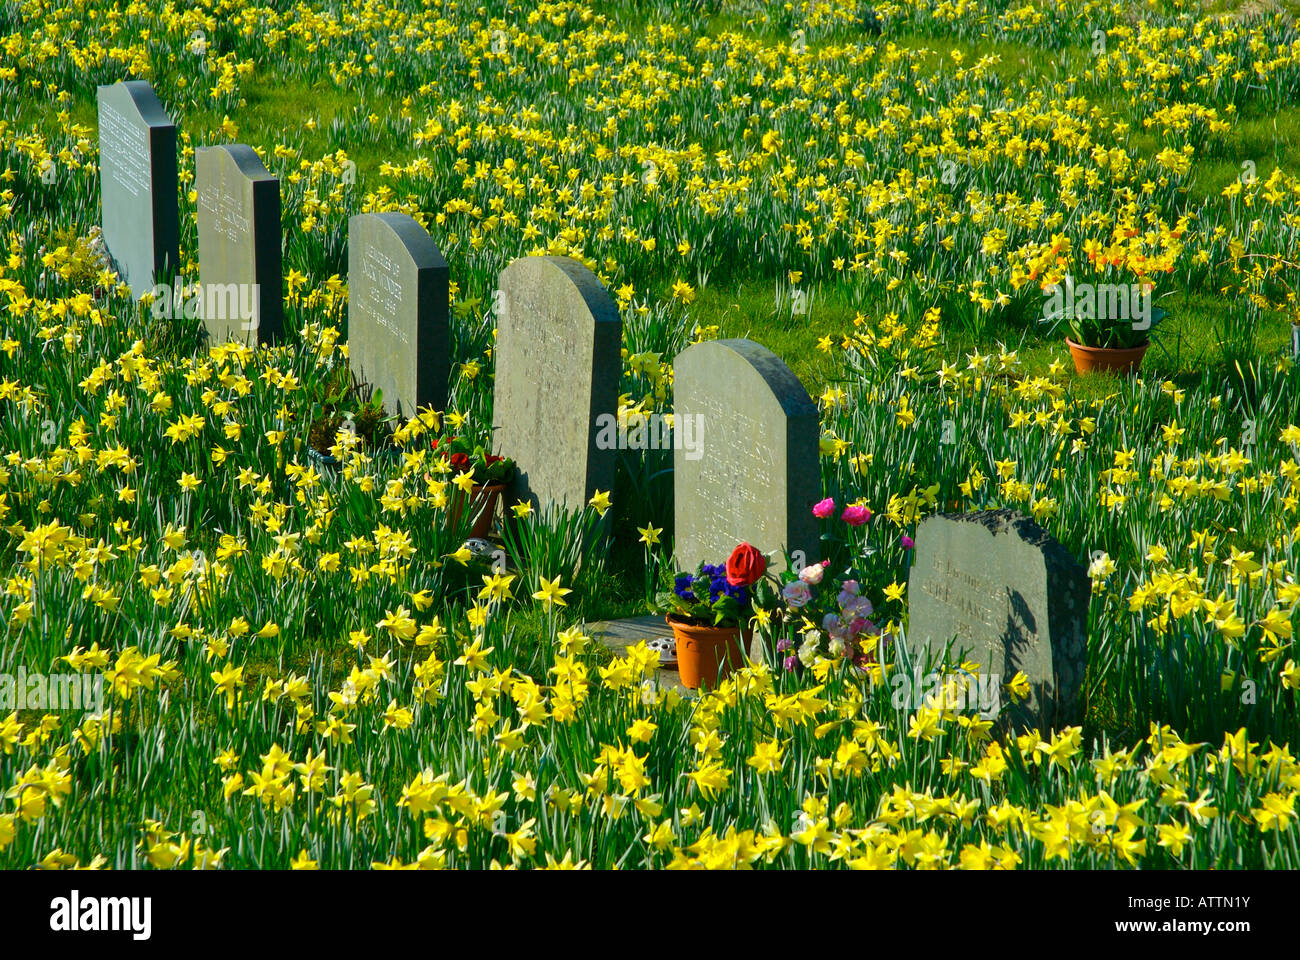 Daffodils bloom around the headstones in the churchyard of Jesus Church, Troutbeck, Cumbria UK Stock Photo